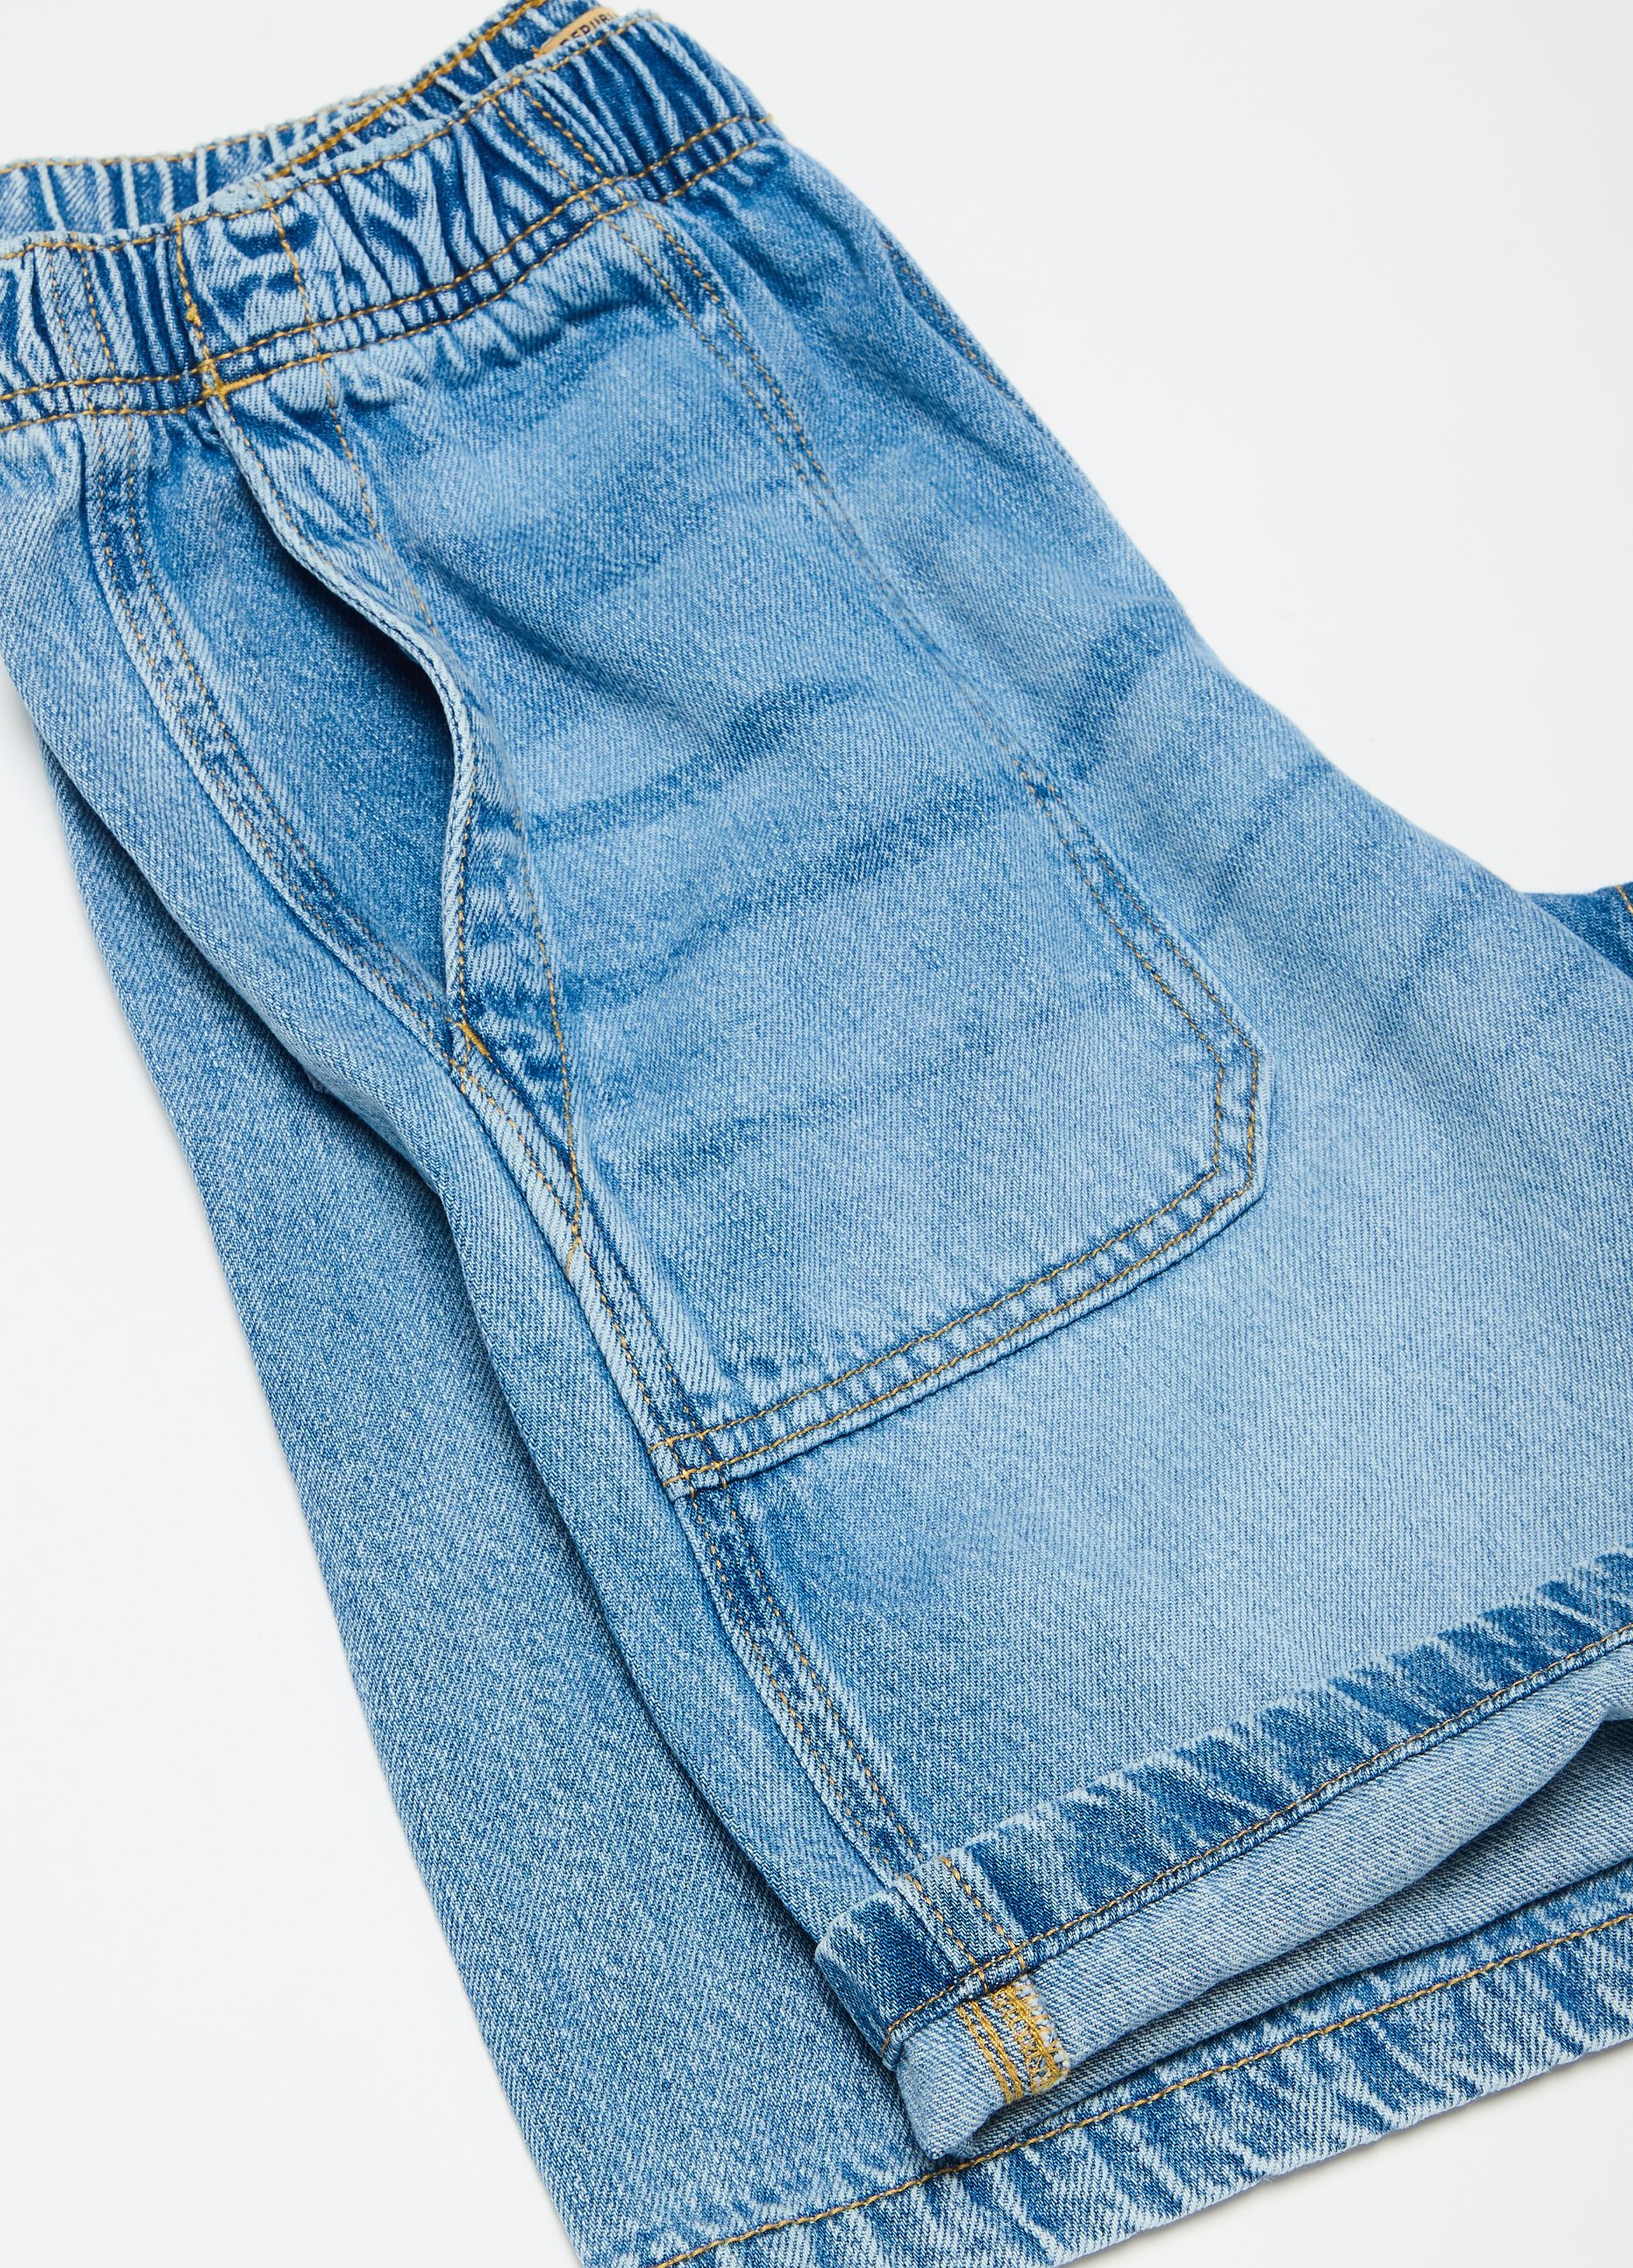 Bermuda joggers in denim with pockets